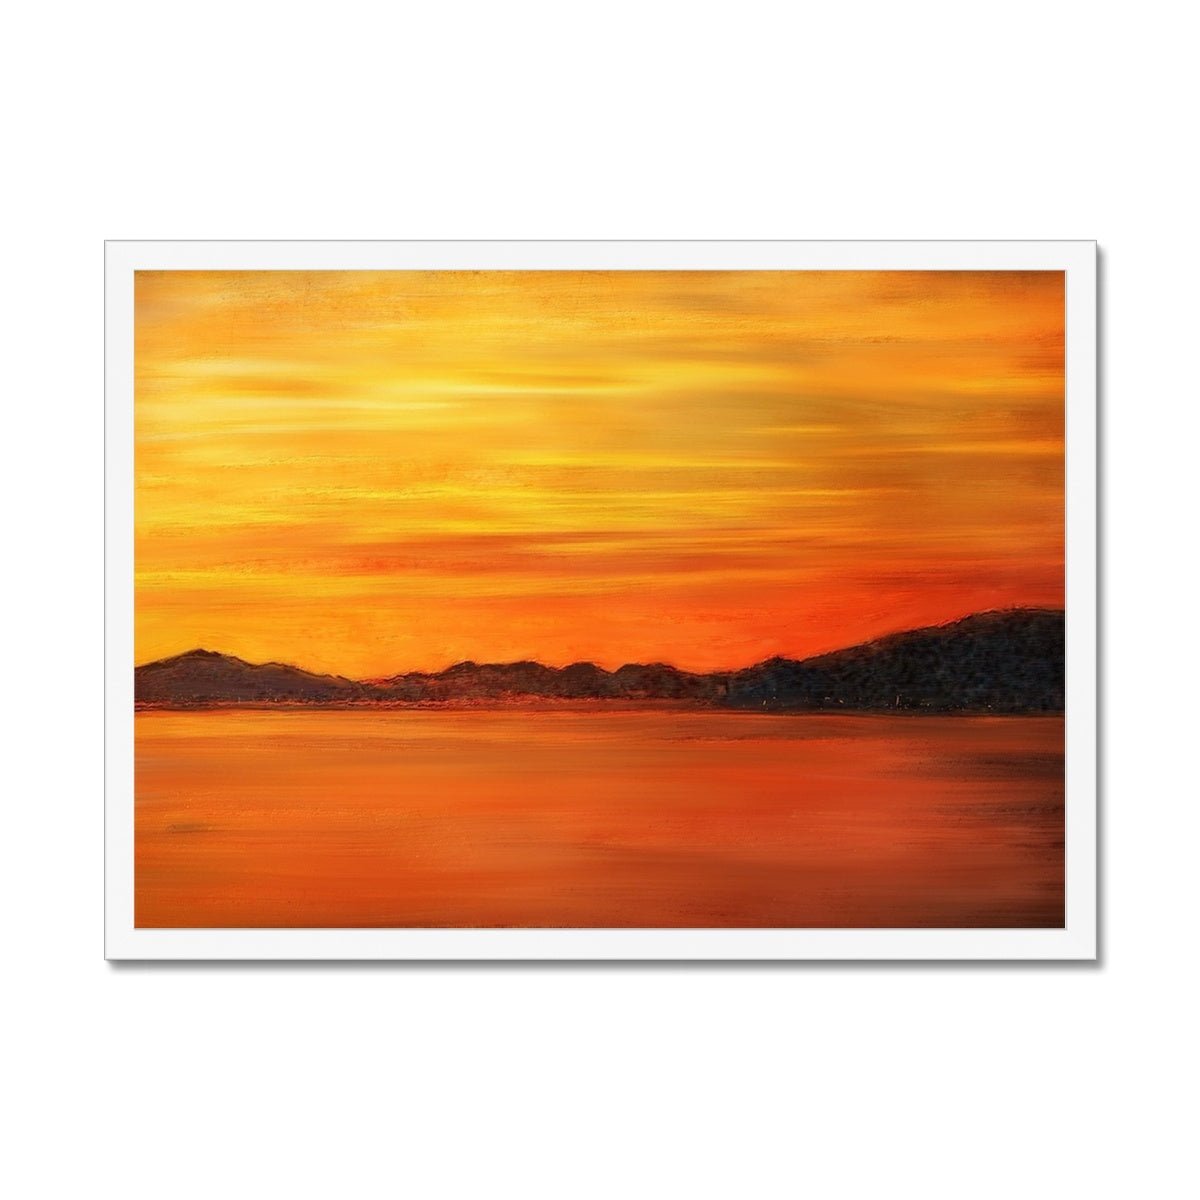 Loch Fyne Sunset Painting | Framed Prints From Scotland-Framed Prints-Scottish Lochs & Mountains Art Gallery-A2 Landscape-White Frame-Paintings, Prints, Homeware, Art Gifts From Scotland By Scottish Artist Kevin Hunter